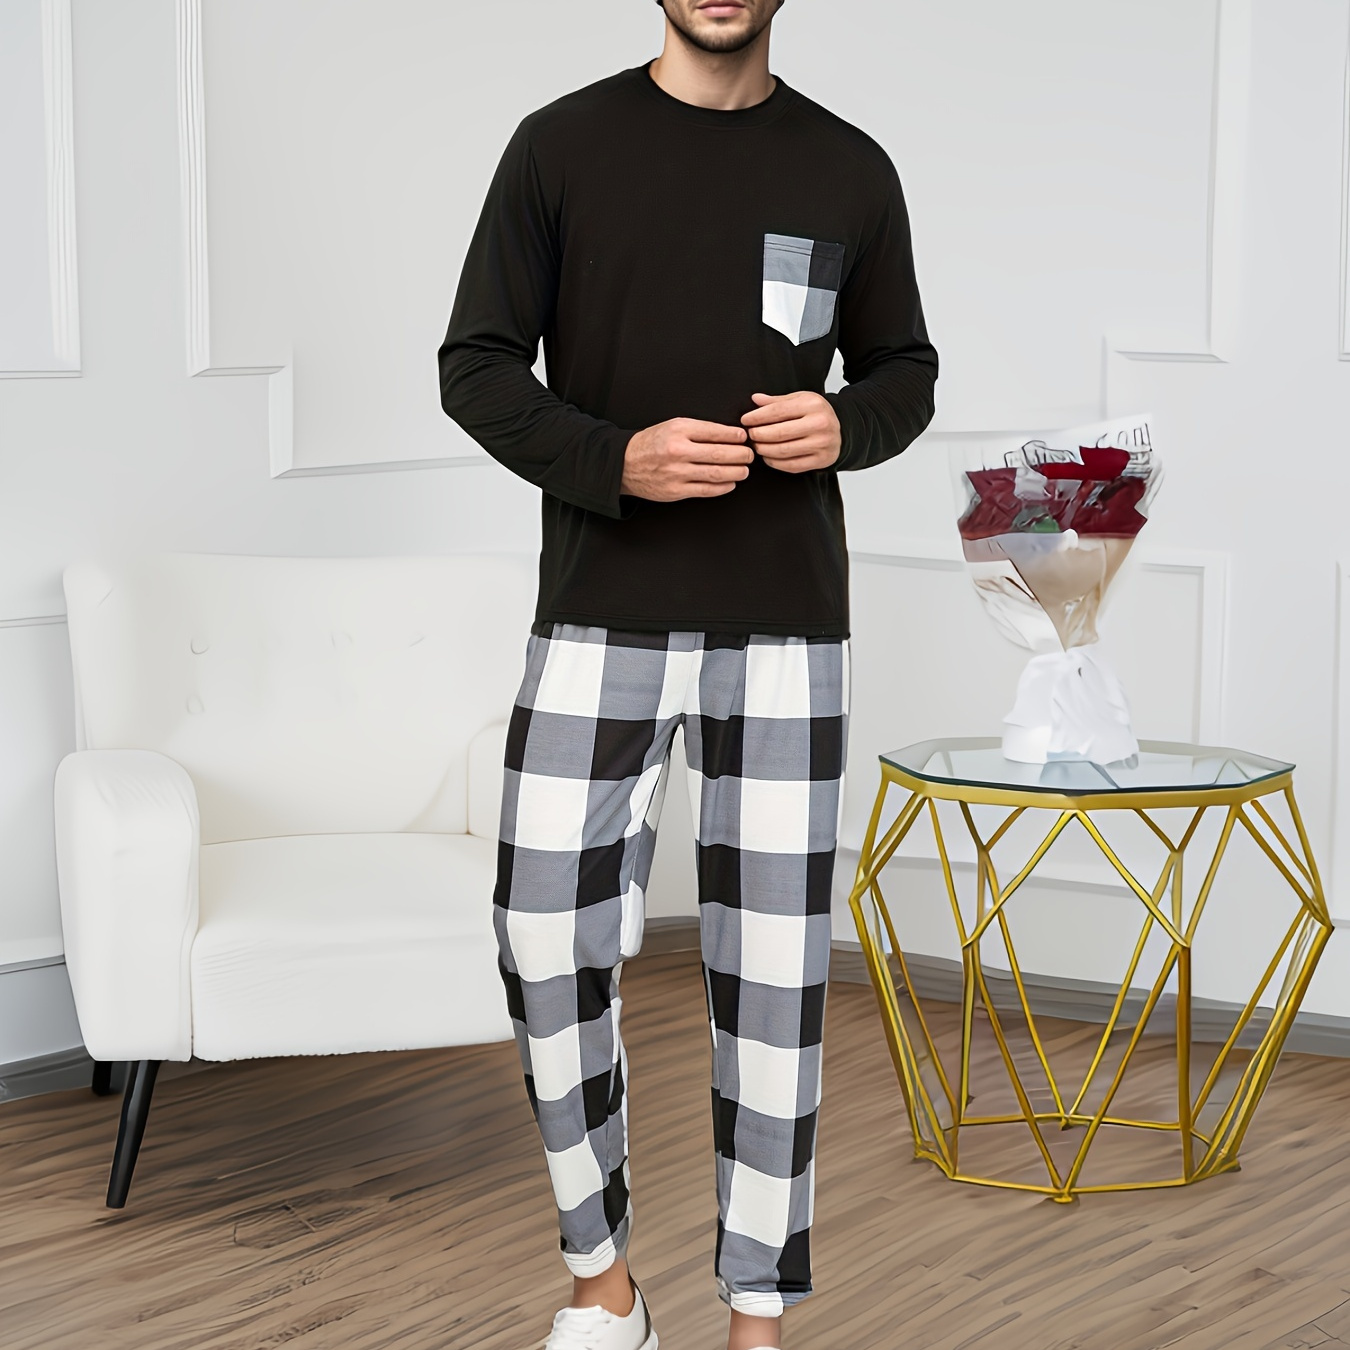 

2 Pcs Men's Cool Long Sleeves With Pocket & Plaid Pants Pajama Sets, Comfortable & Skin-friendly Style Pajamas For Men's Cozy Loungewear